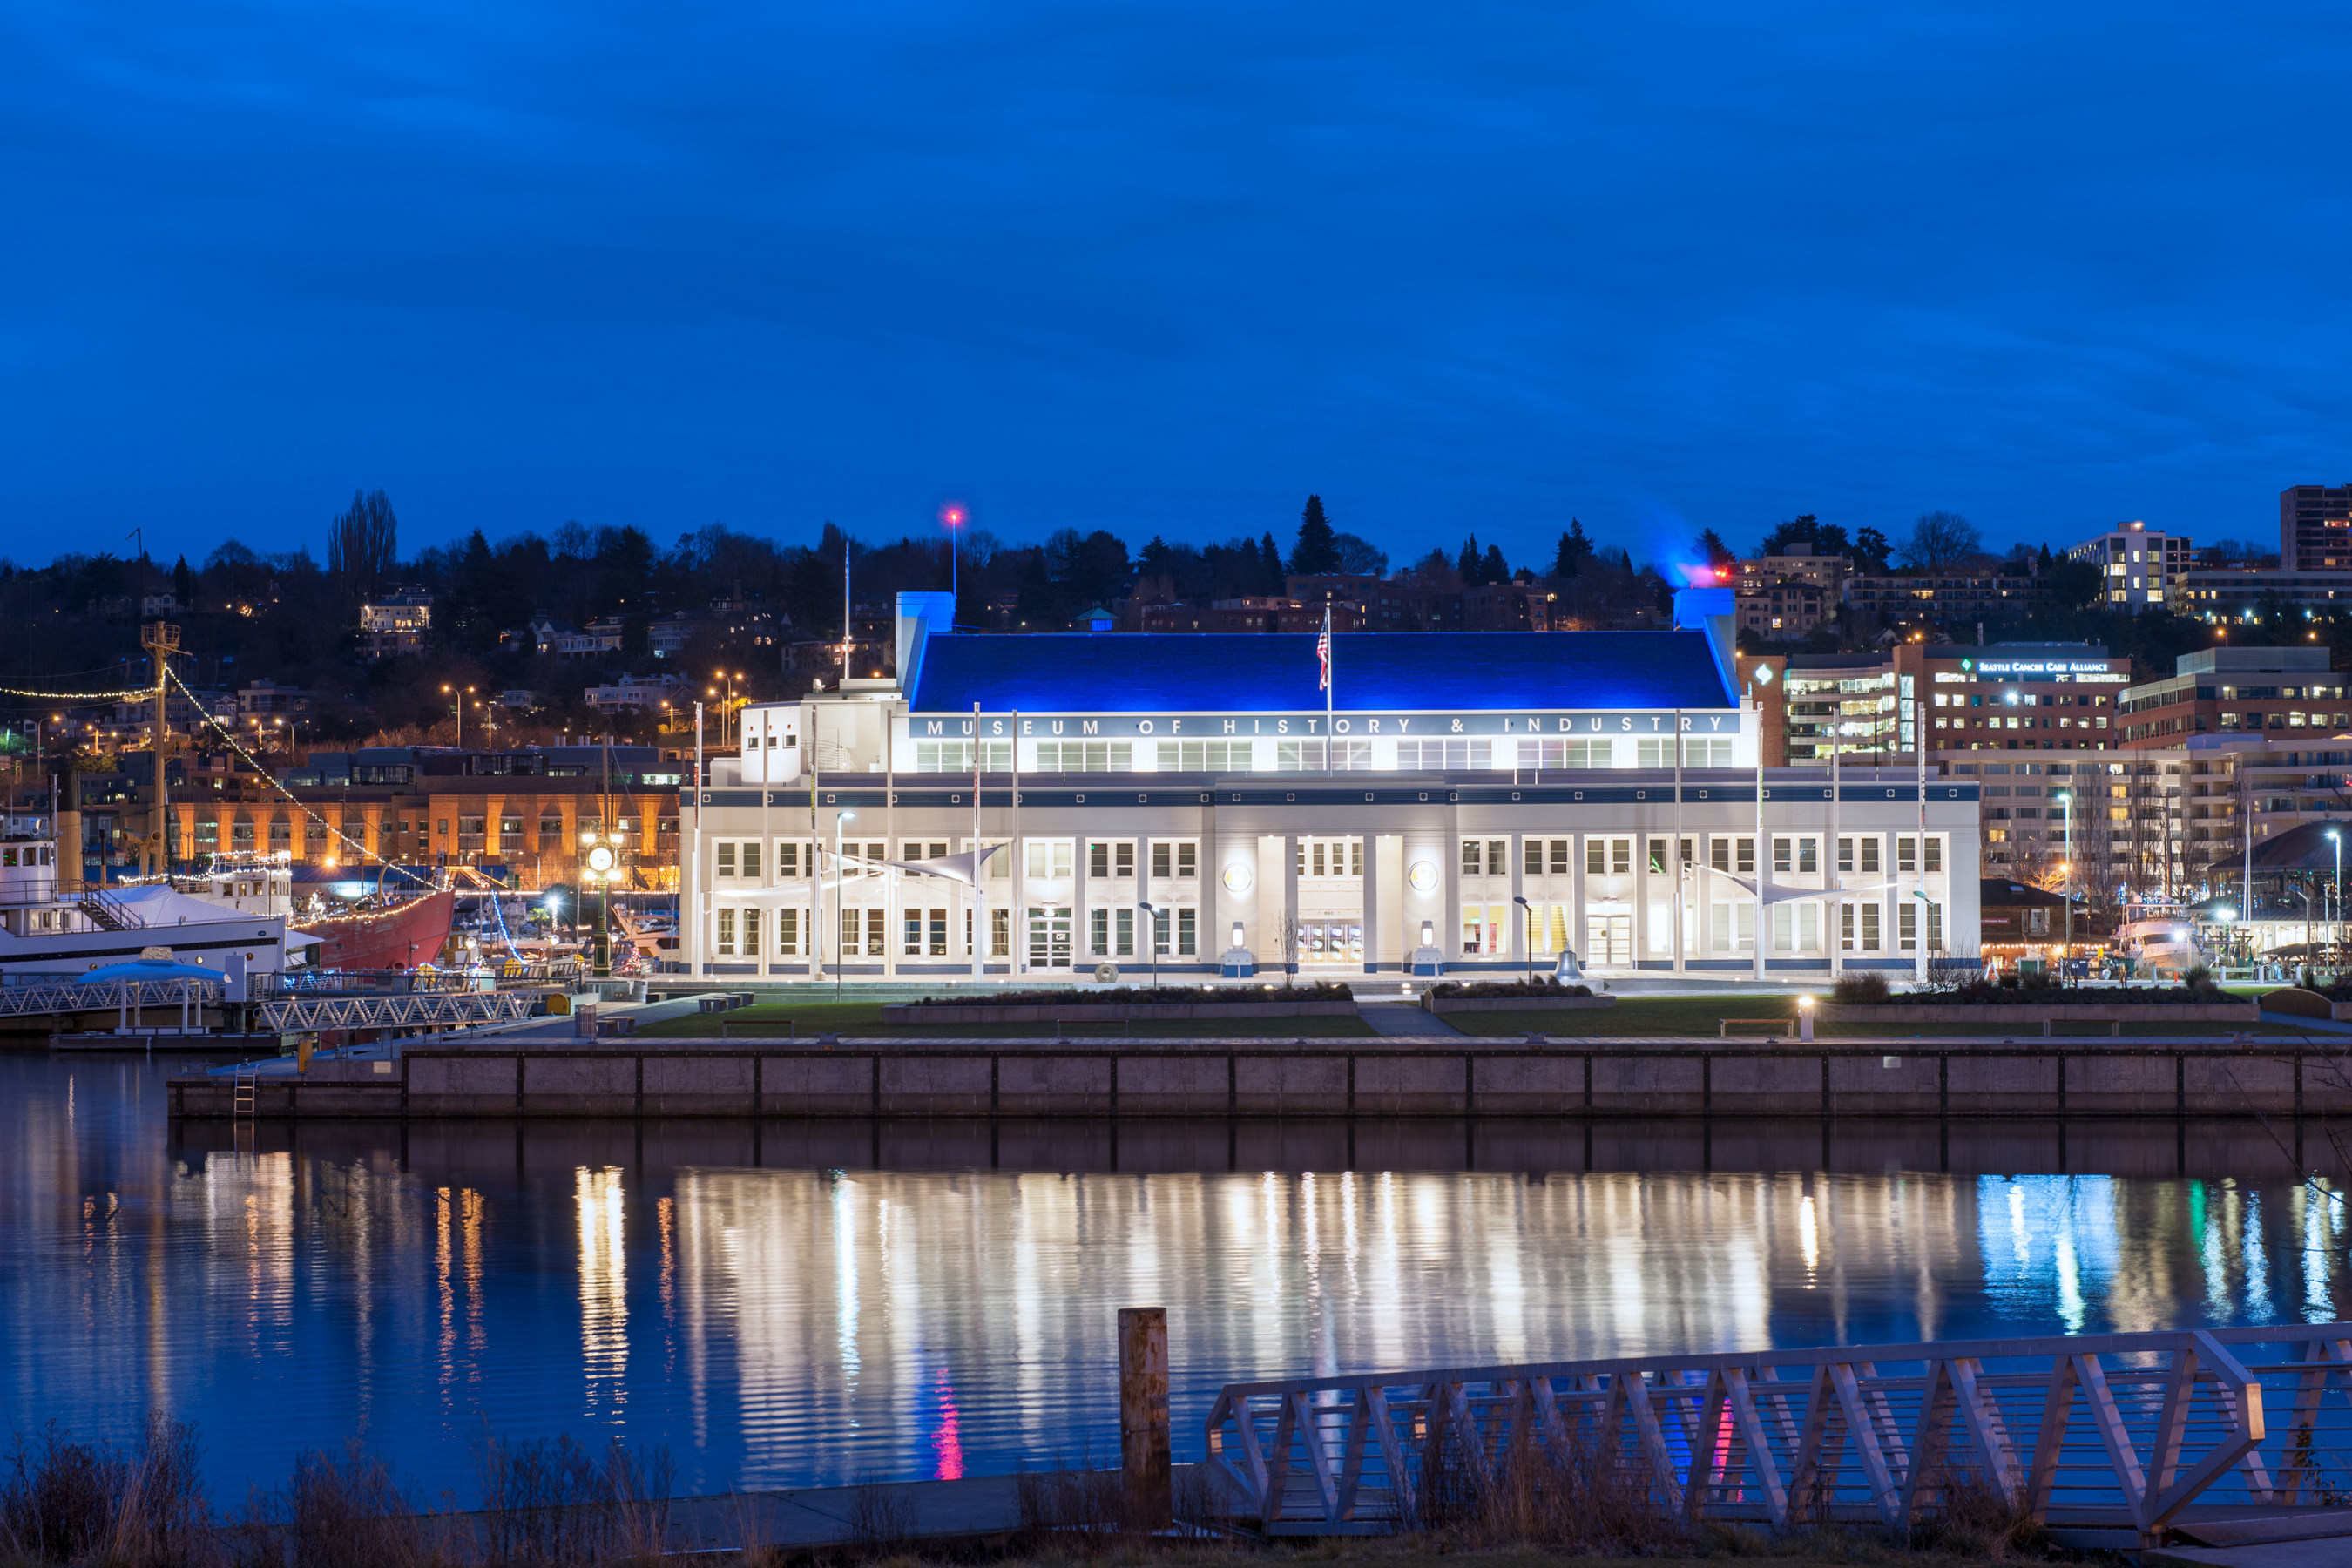 Museum of History and Industry (MOHAI) participates in Seattle Museum Month, February 1-28, 2015. Photo credit: Ed LaCasse, Property of MOHAI.